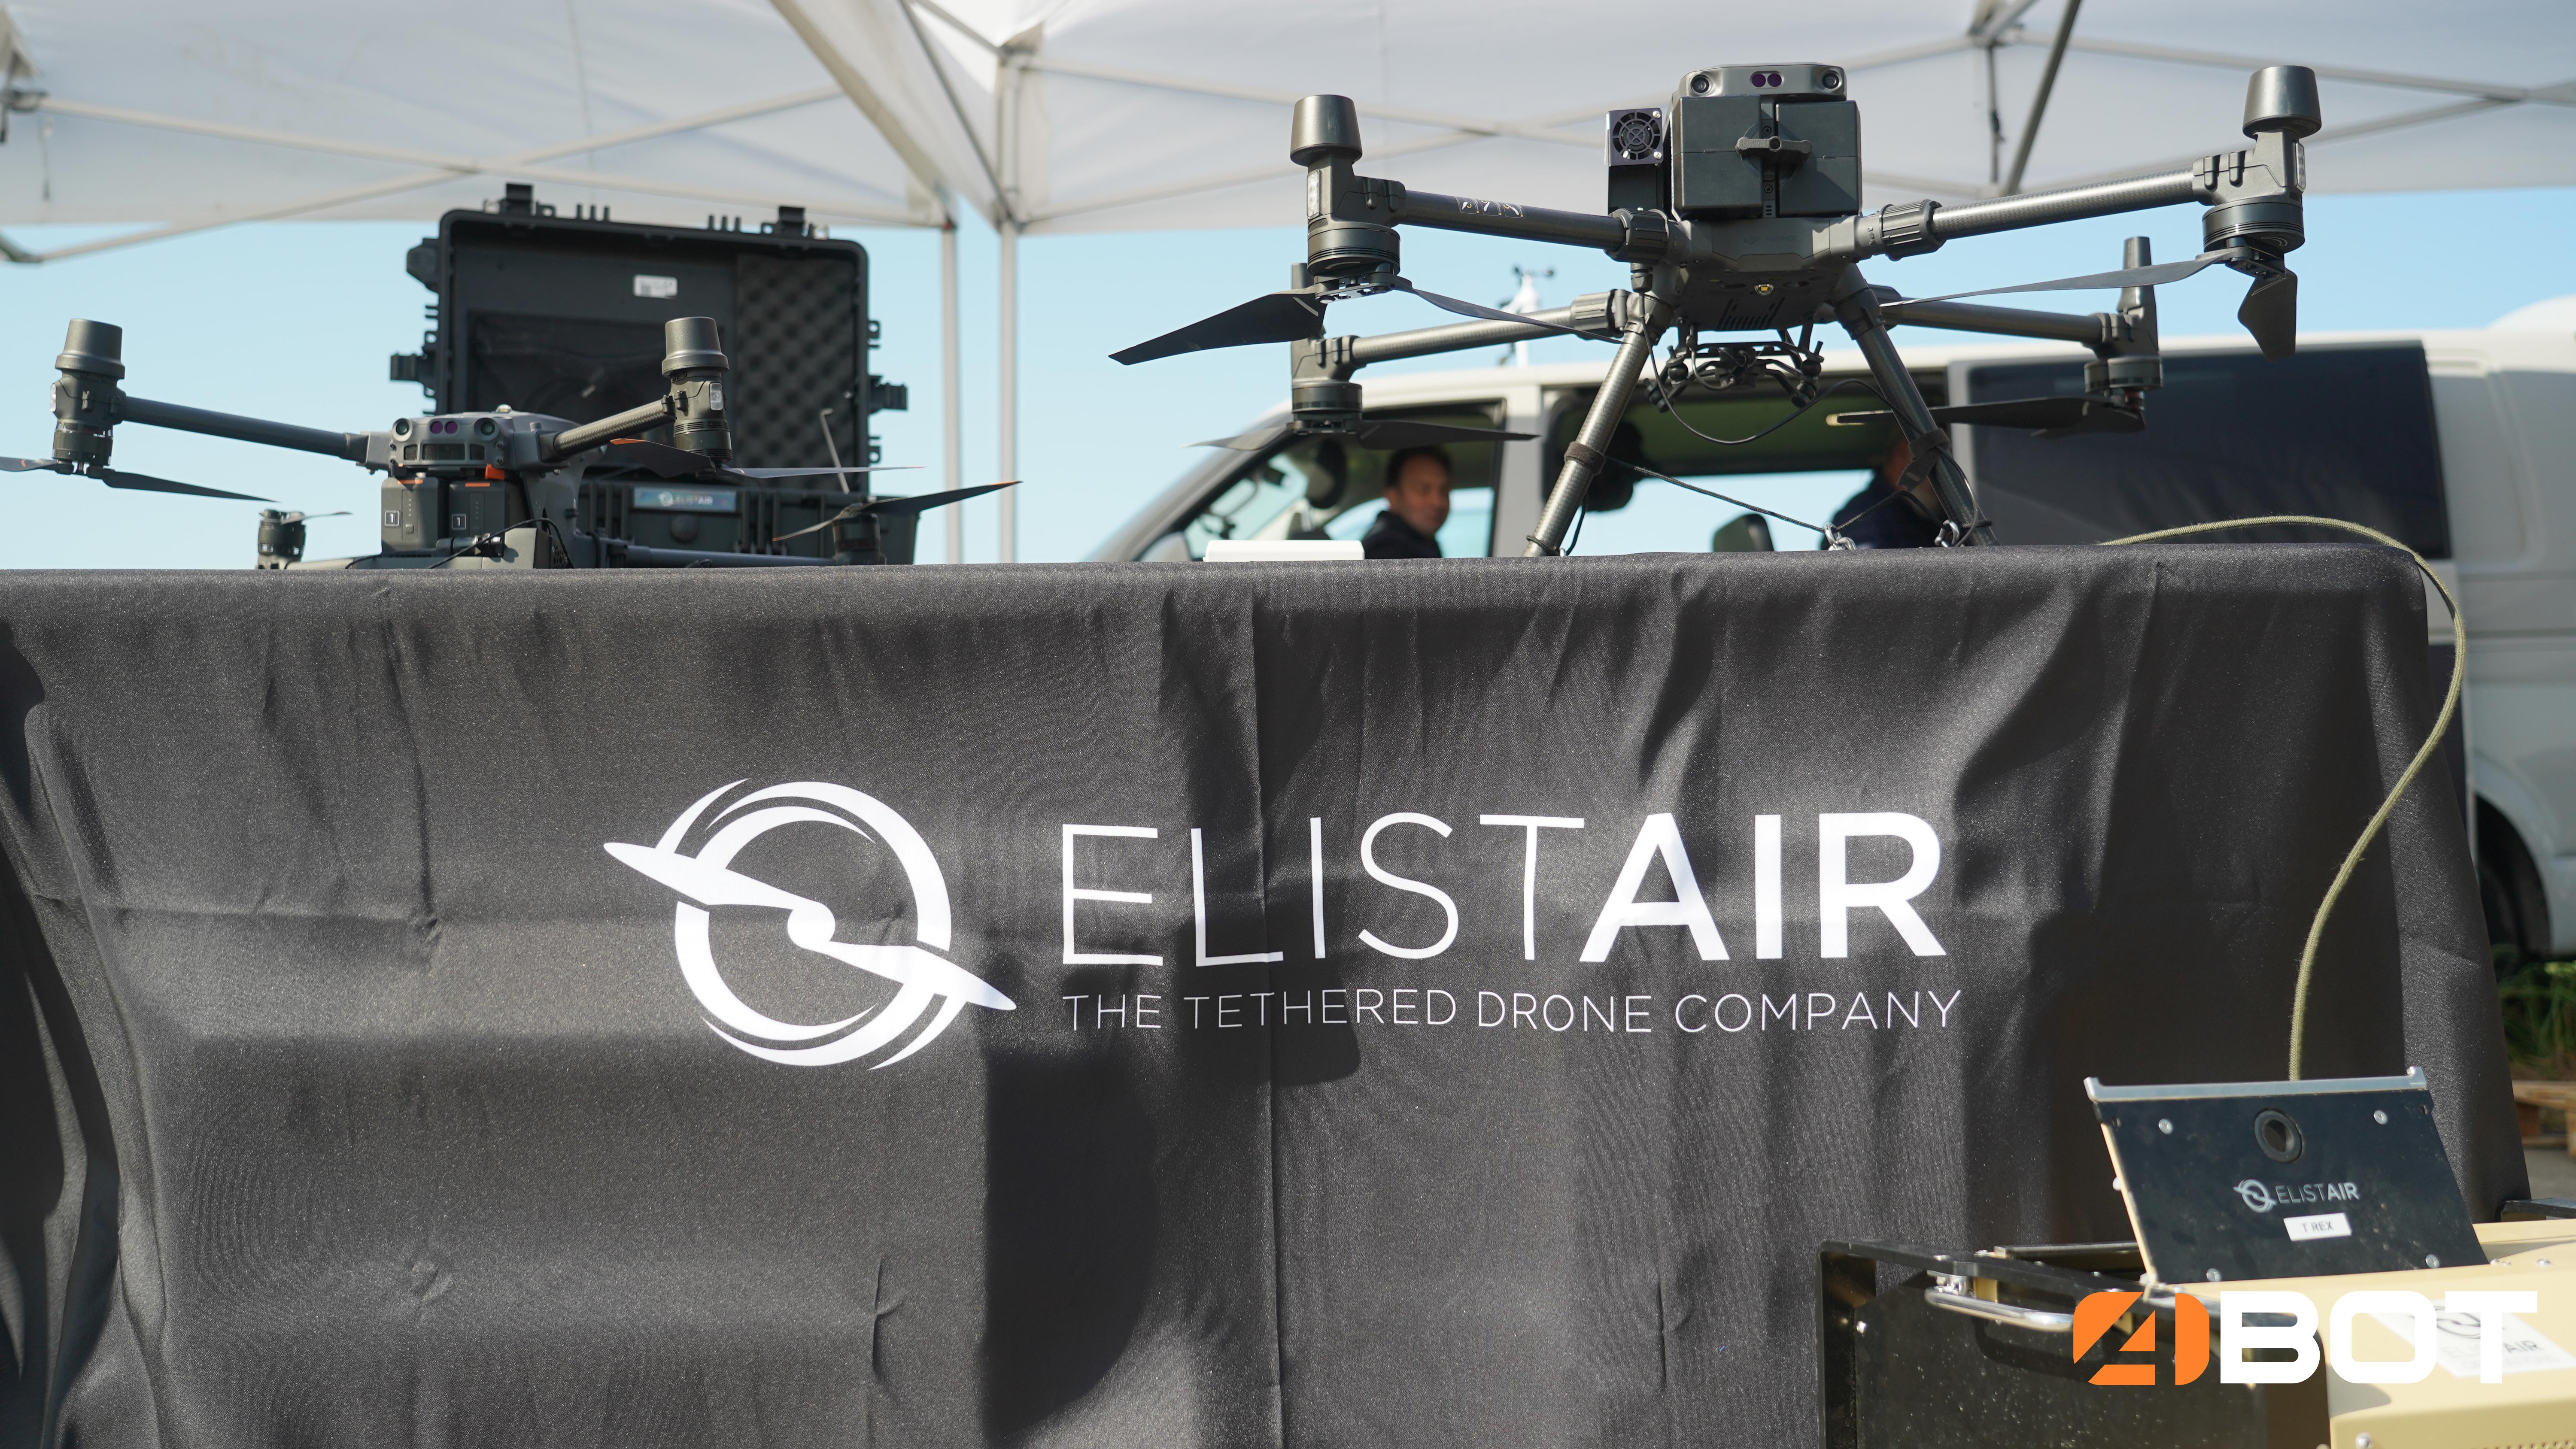 Elistair the tethered drone company